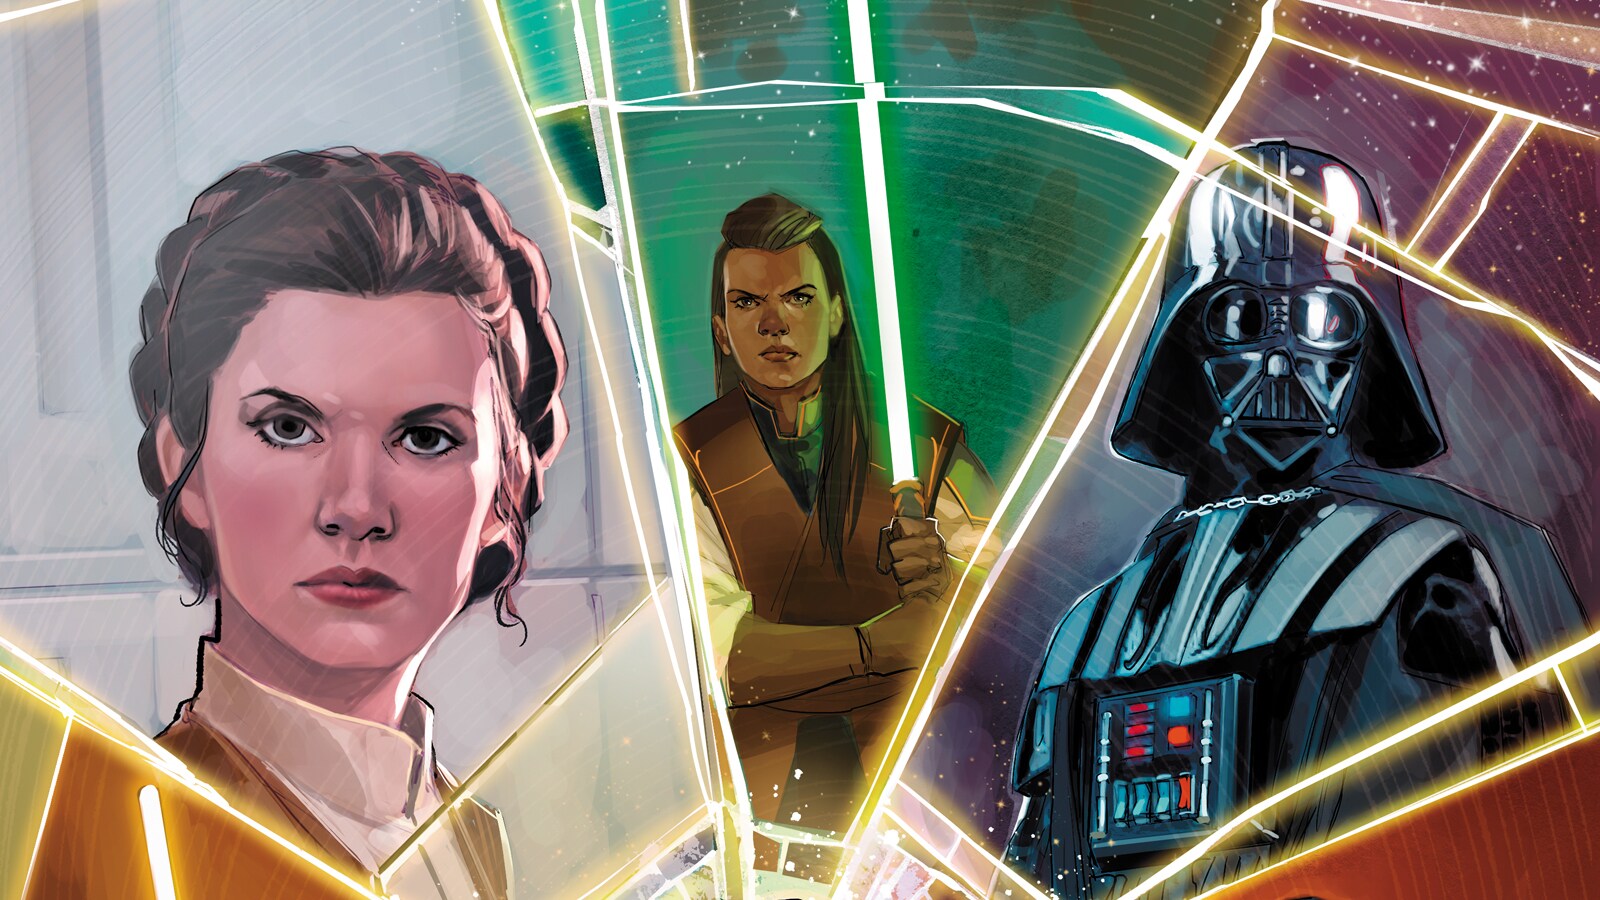 Marvel’s New Star Wars: Revelations to Offer a Glimpse at What’s to Come – First Look